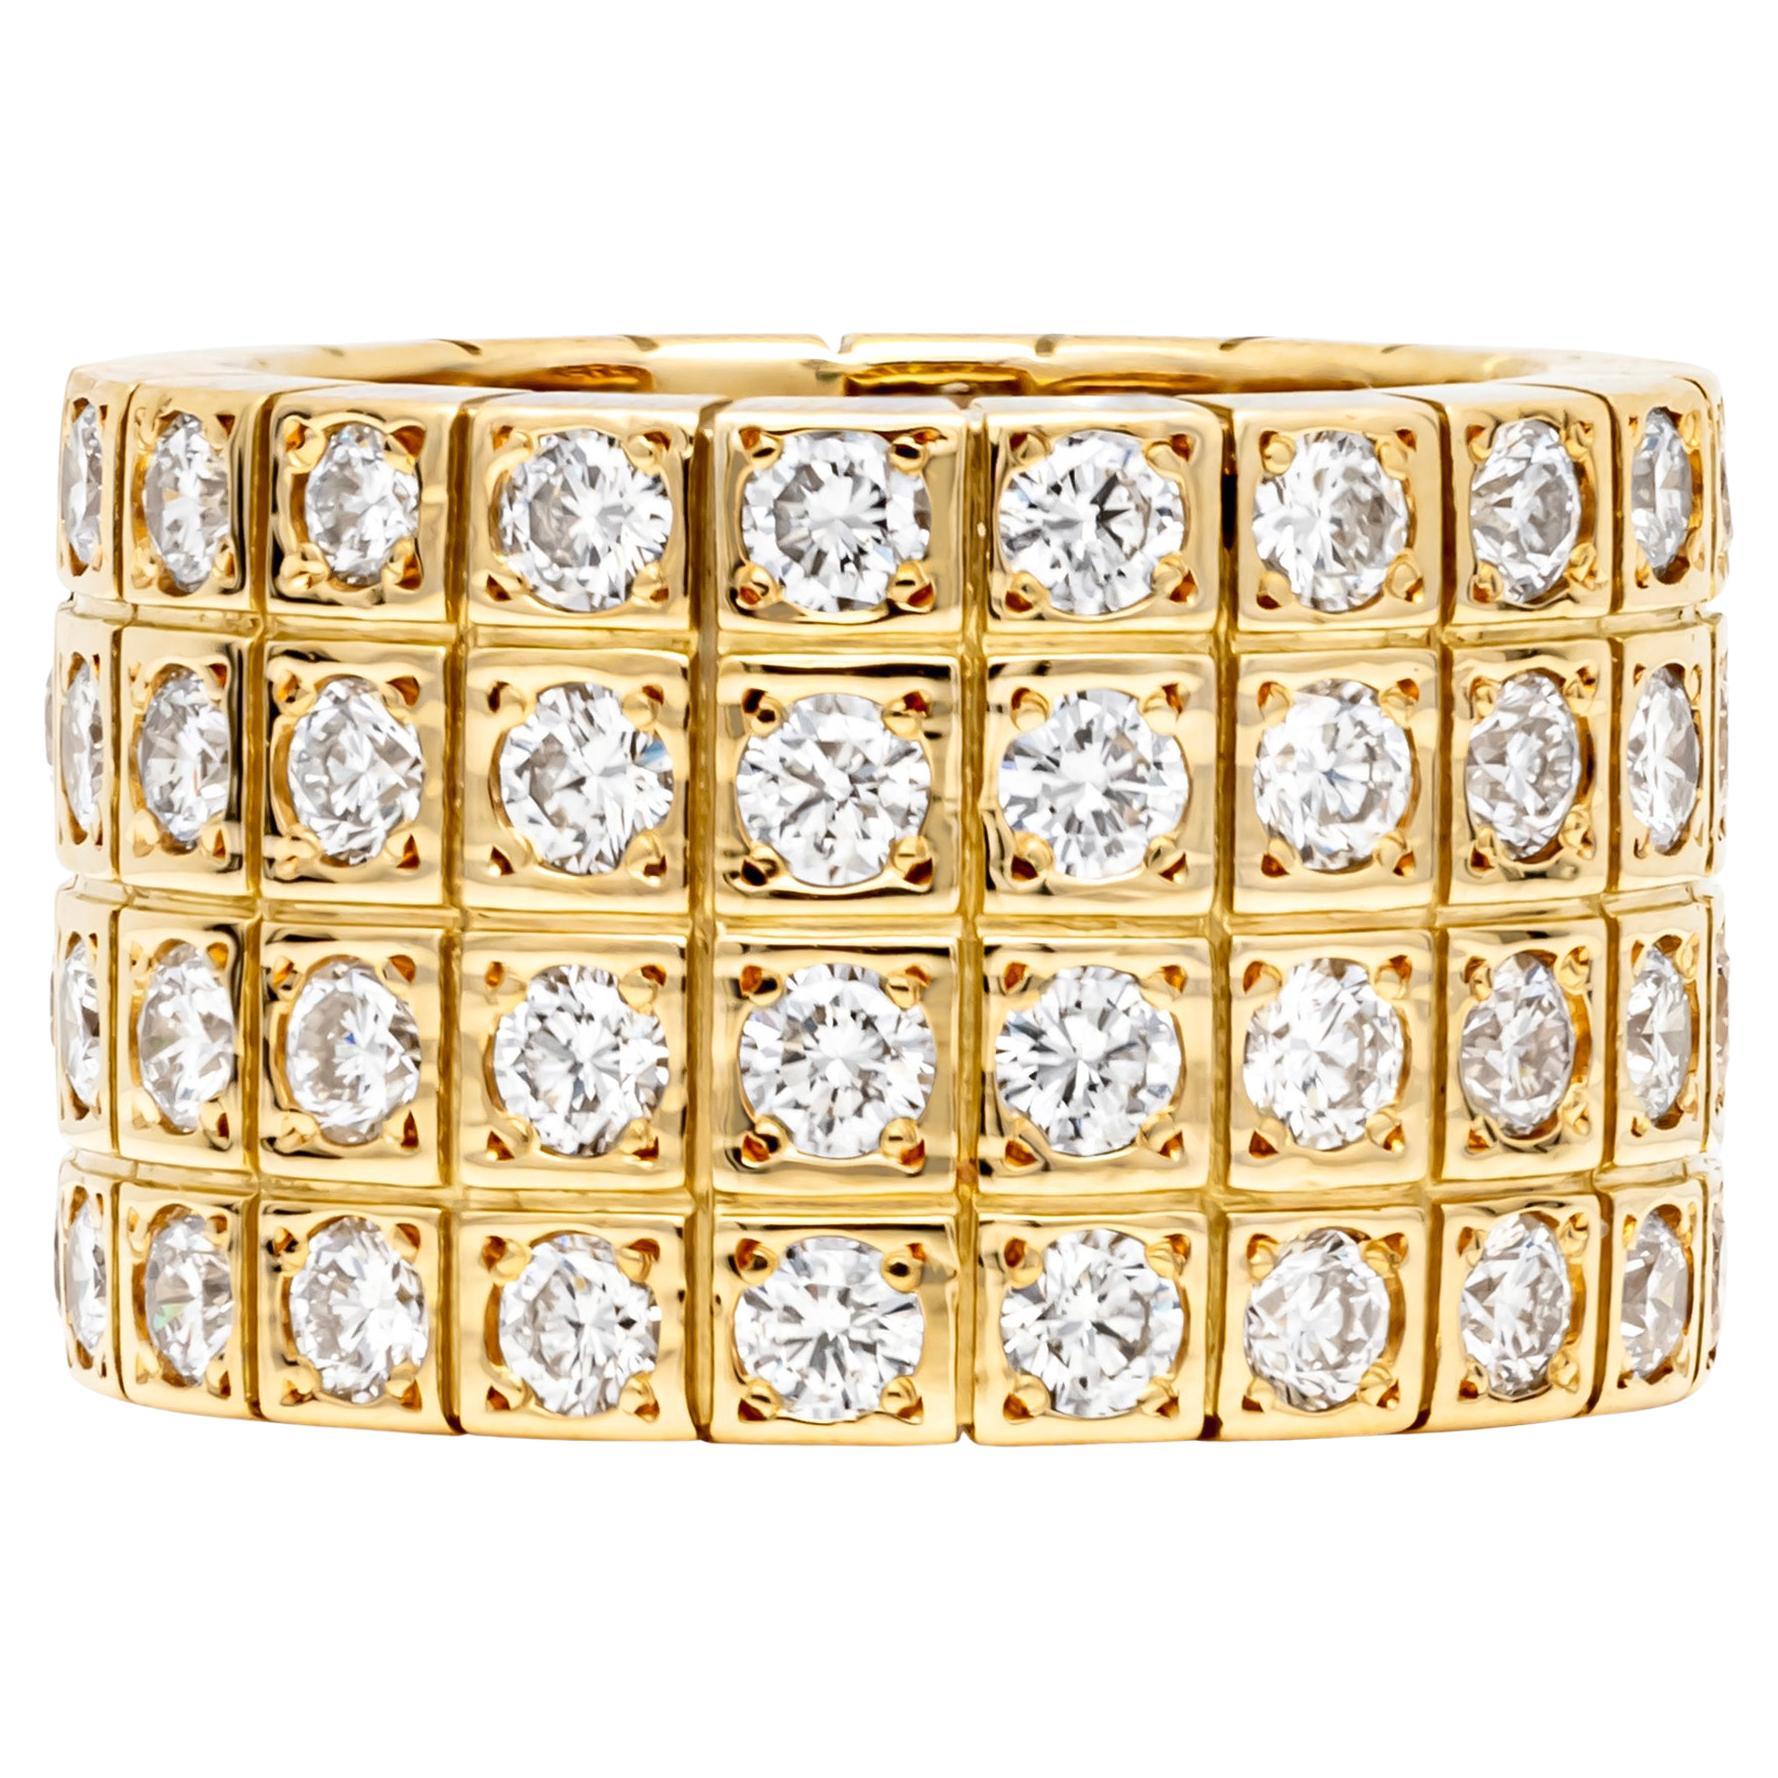 A fashionable eternity ring showcasing four rows of round brilliant diamonds, pave/bezel set in 18K Yellow Gold. Total weight of diamonds is 4.40 carats and approximately F color, VS clarity.  Can be worn as an everyday ring or in any special